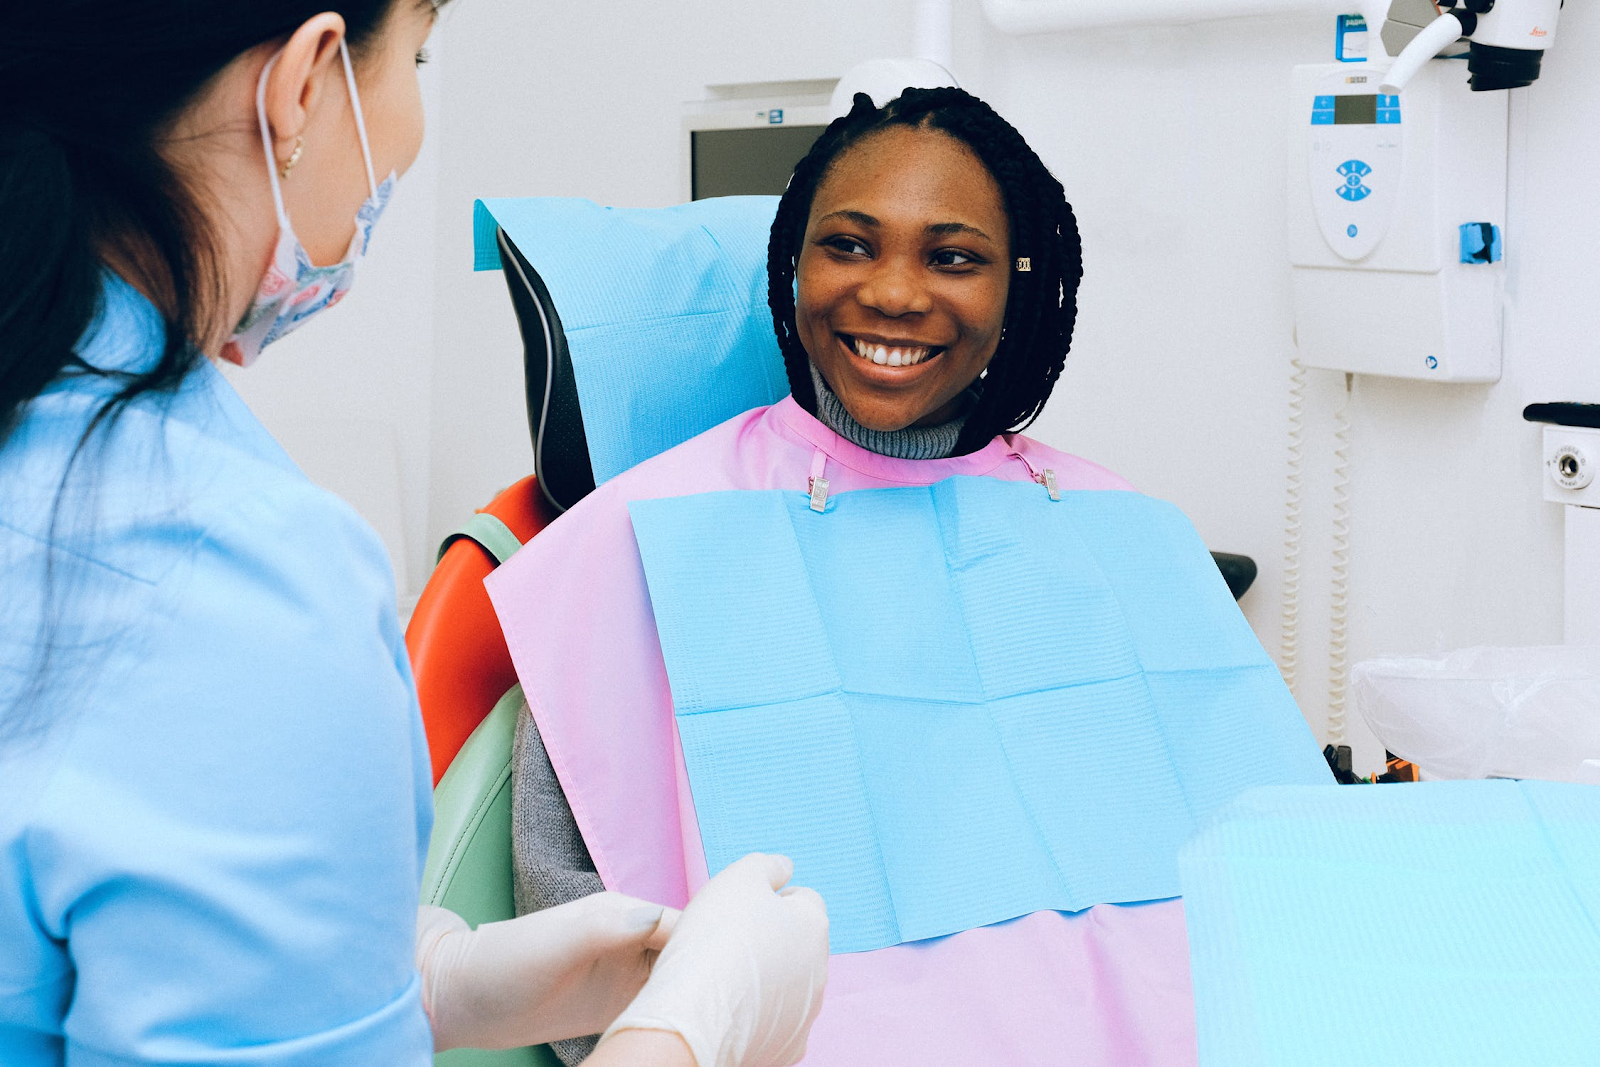 Family Dental Clinic - A young woman sitting in a dental chair smiling at the Dentist